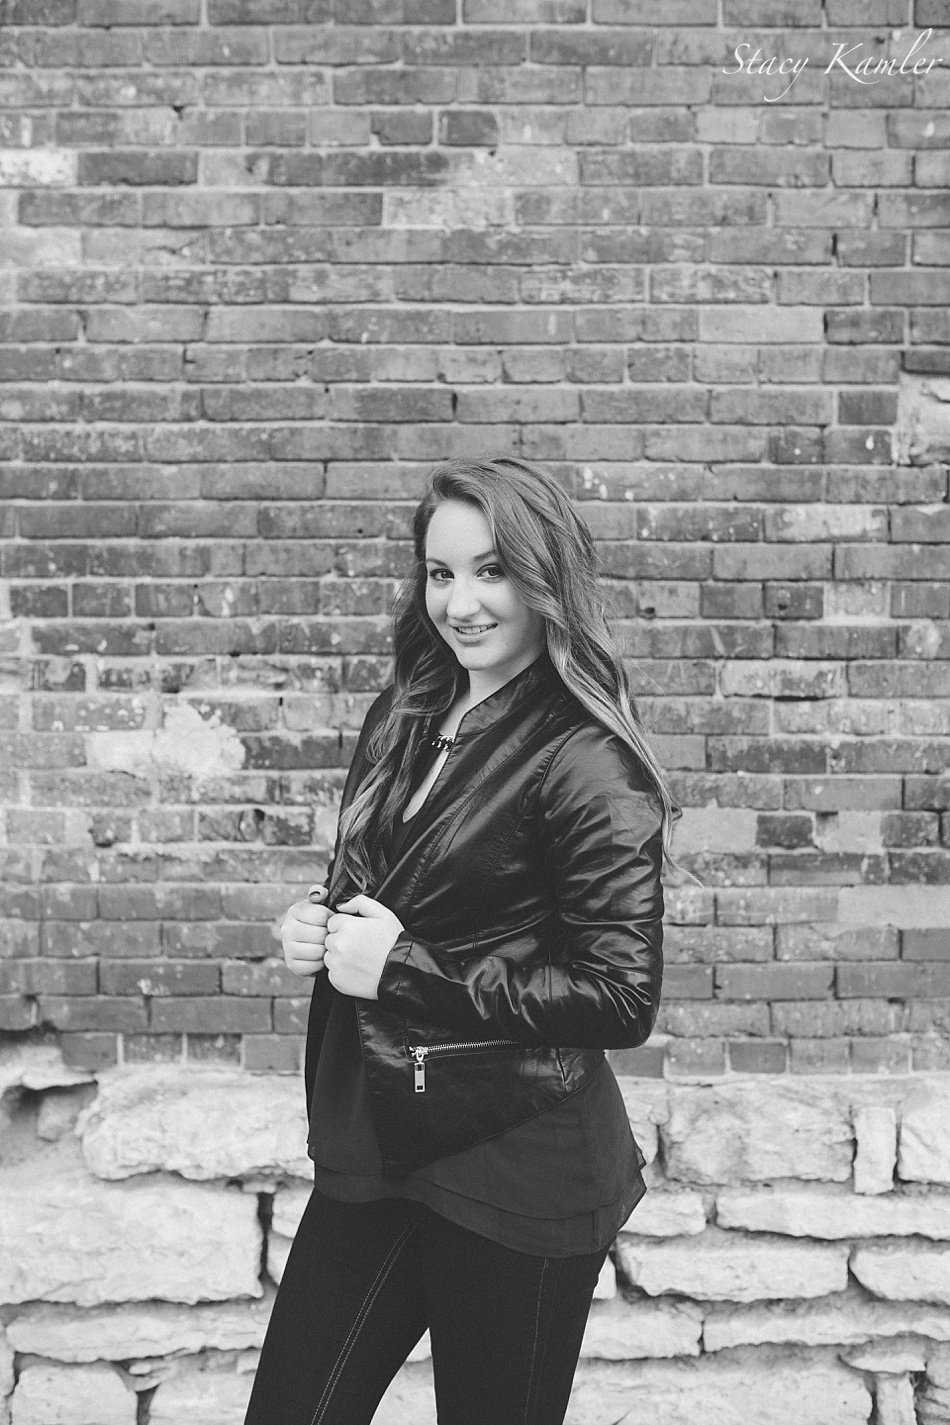 Senior girl in leather jacket against brick wall